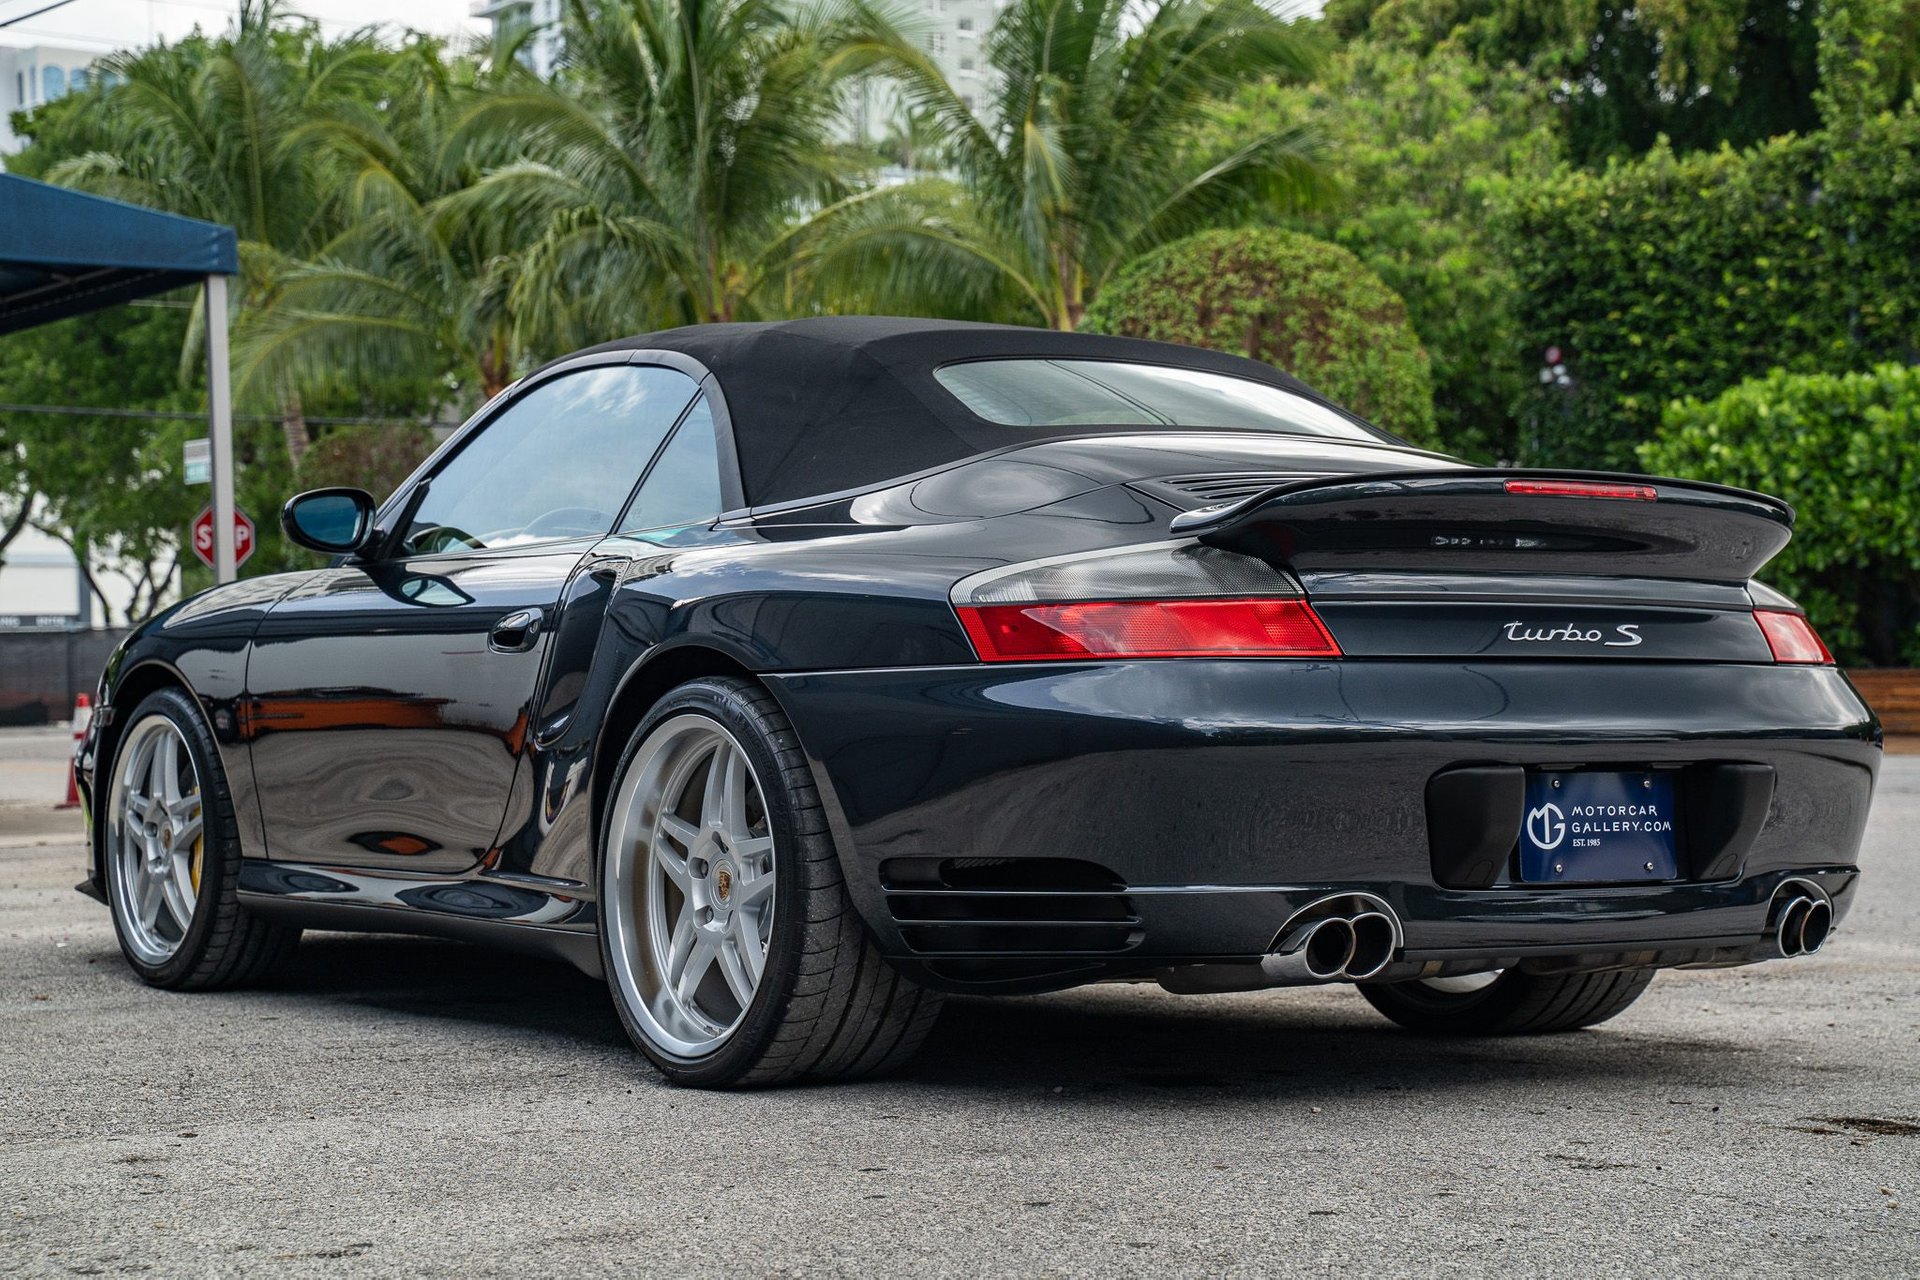 2005 Porsche 911 Turbo S | Classic Car Gallery: Exotic & Vintage Cars -  Motorcar Gallery